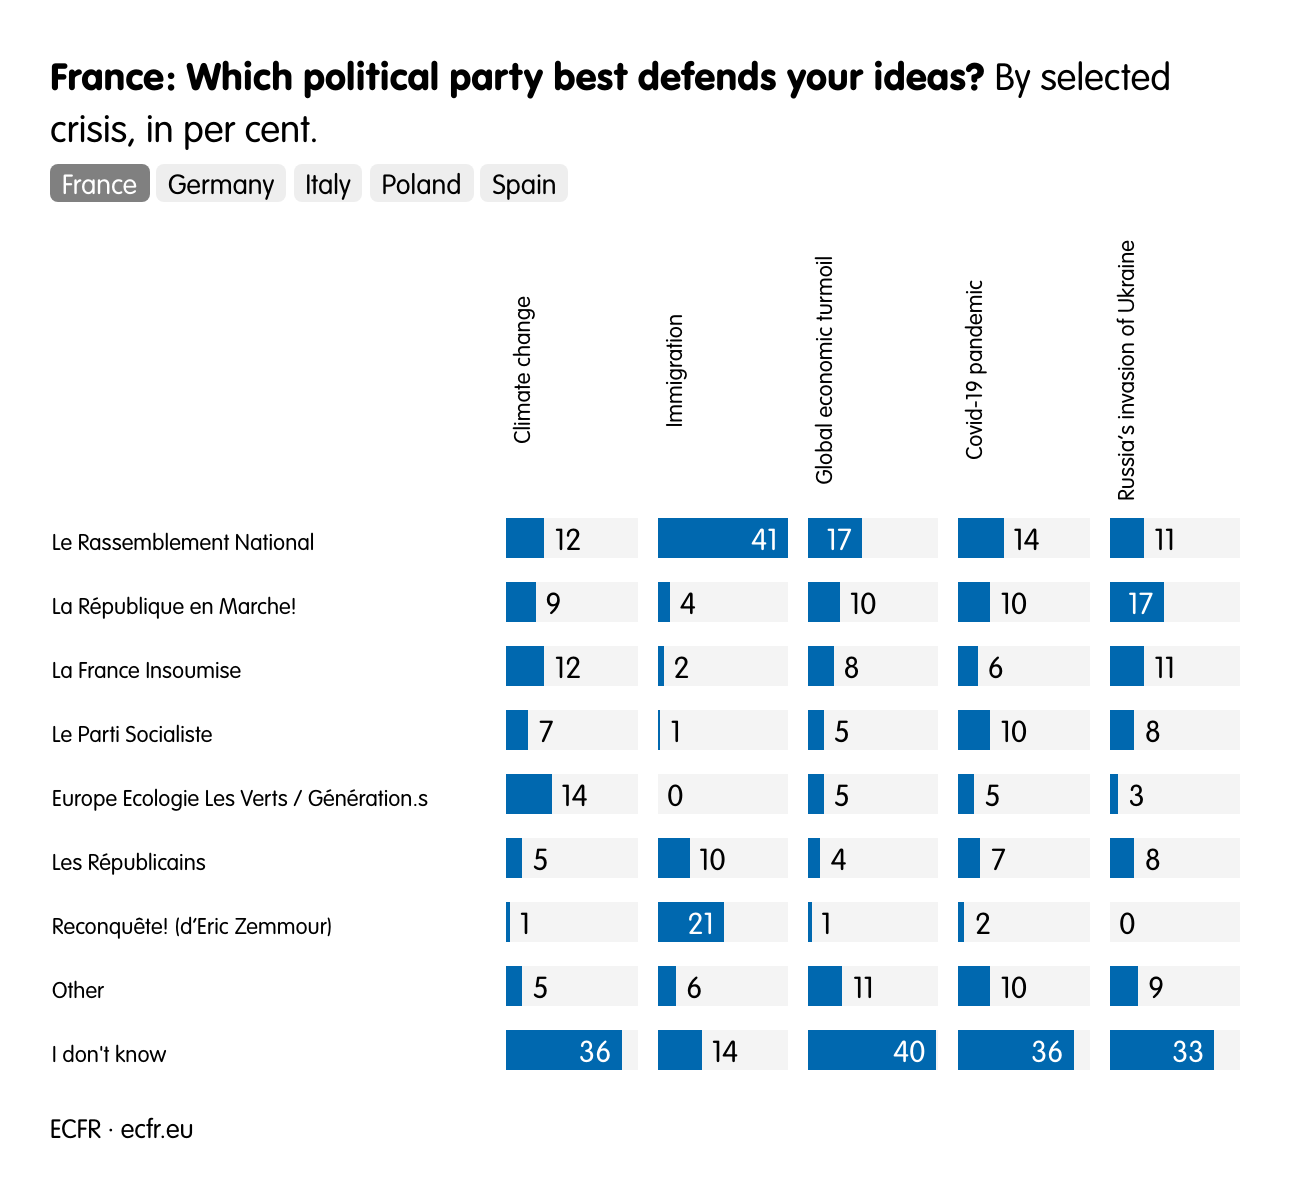 France: Which political party best defends your ideas?